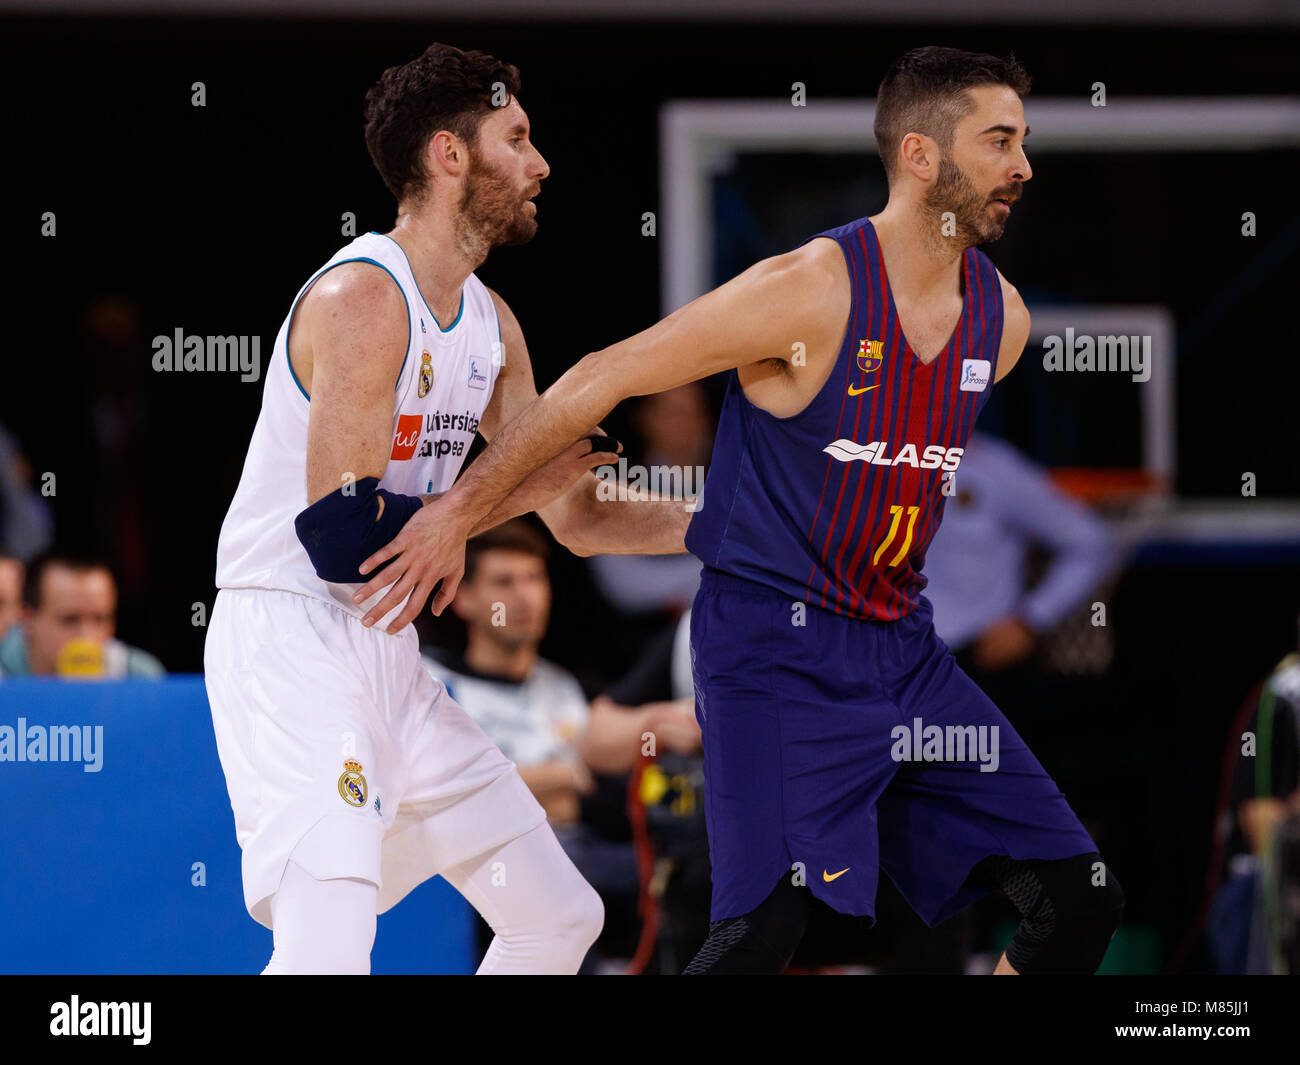 BARCELONA, SPAIN - MARCH 11: Juan Carlos Navarro, #11 of FC Barcelona Lassa  in action with Rudy Fernandez, #5 of Real Madrid during the 2017/2018 End  Stock Photo - Alamy